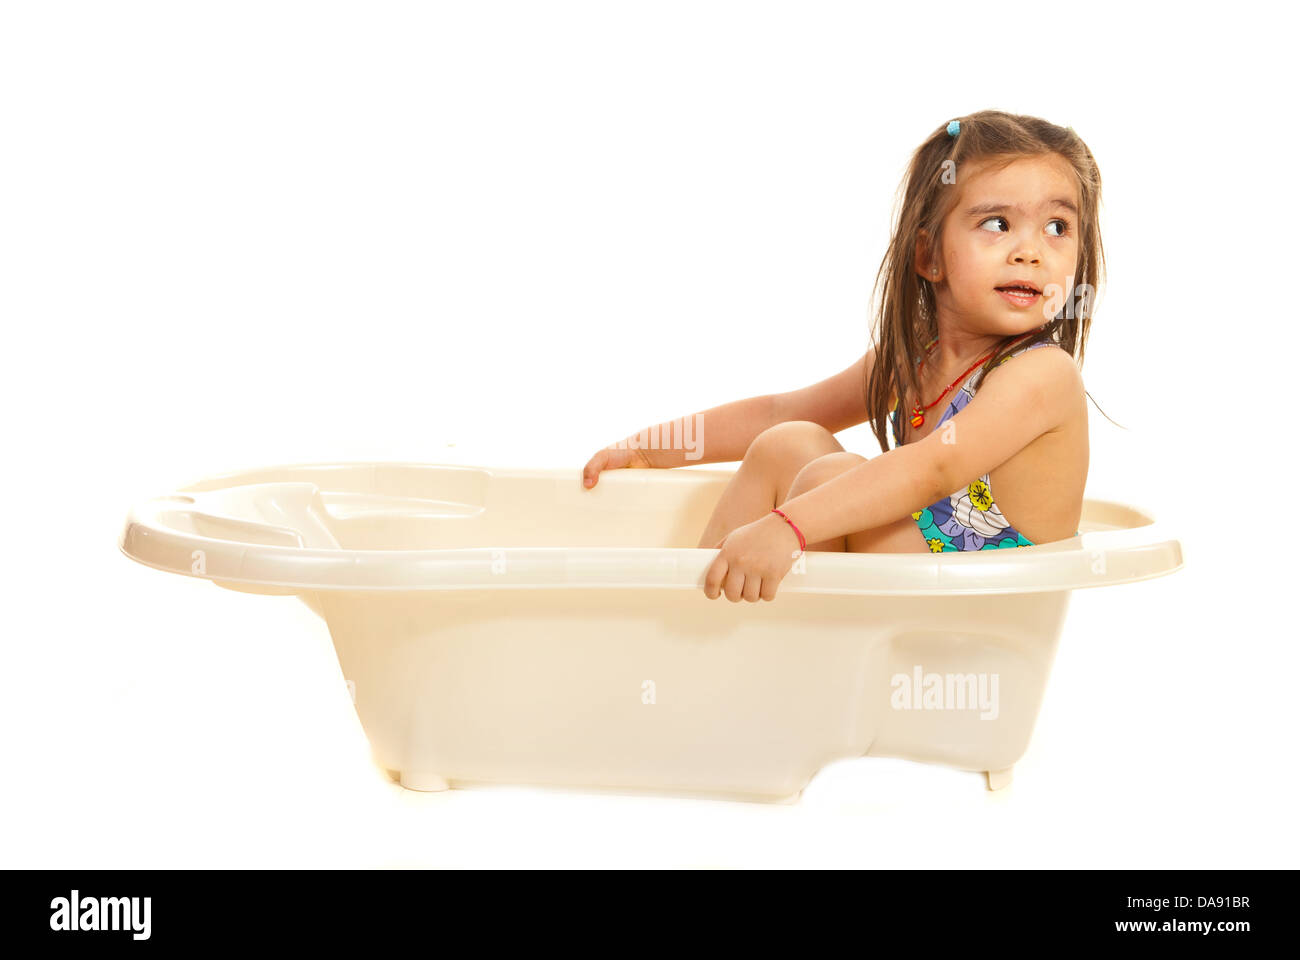 Cute preschool girl in washtub looking away to copy space isolated on white background Stock Photo